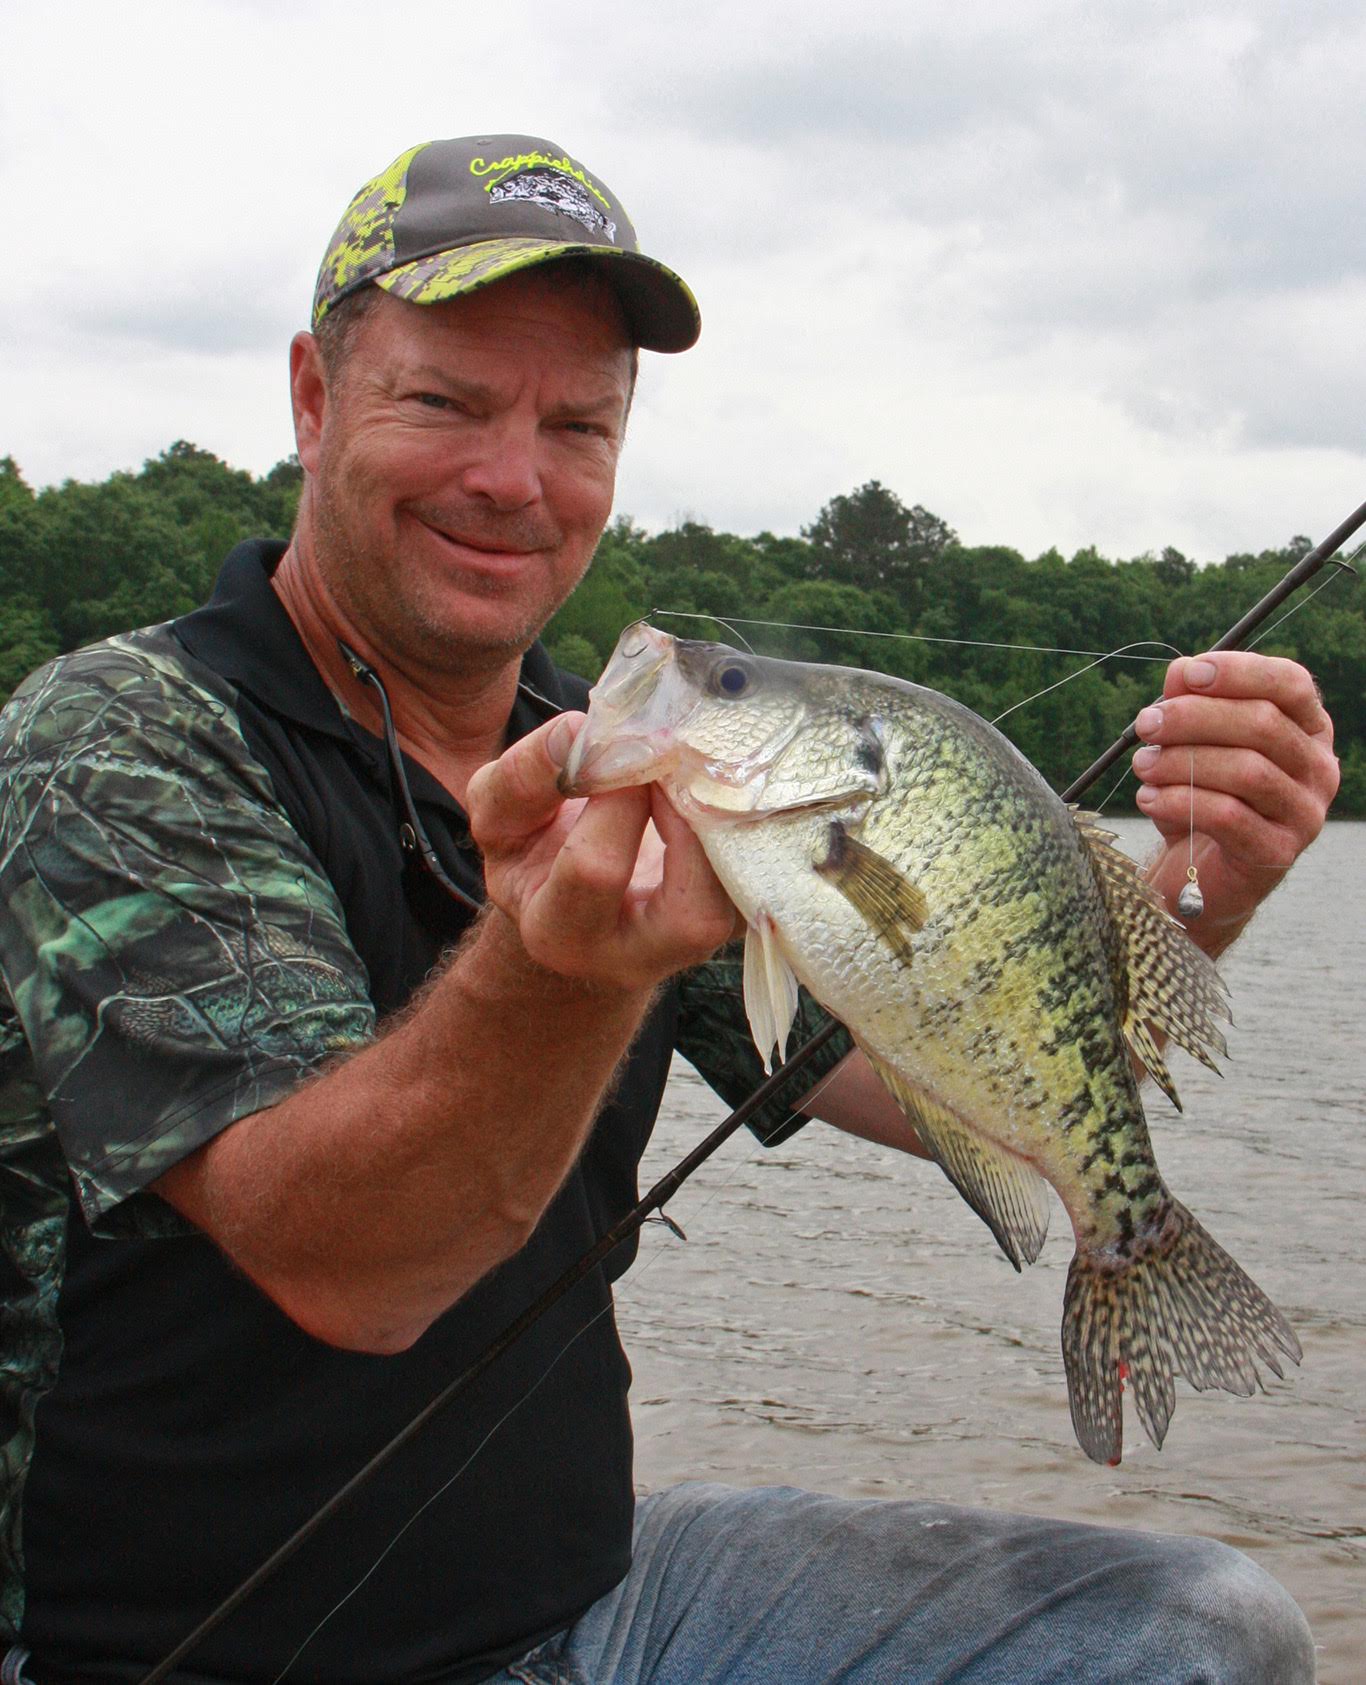 The Complete Guide to Drop Shot Fishing - Bass Fishing Videos and